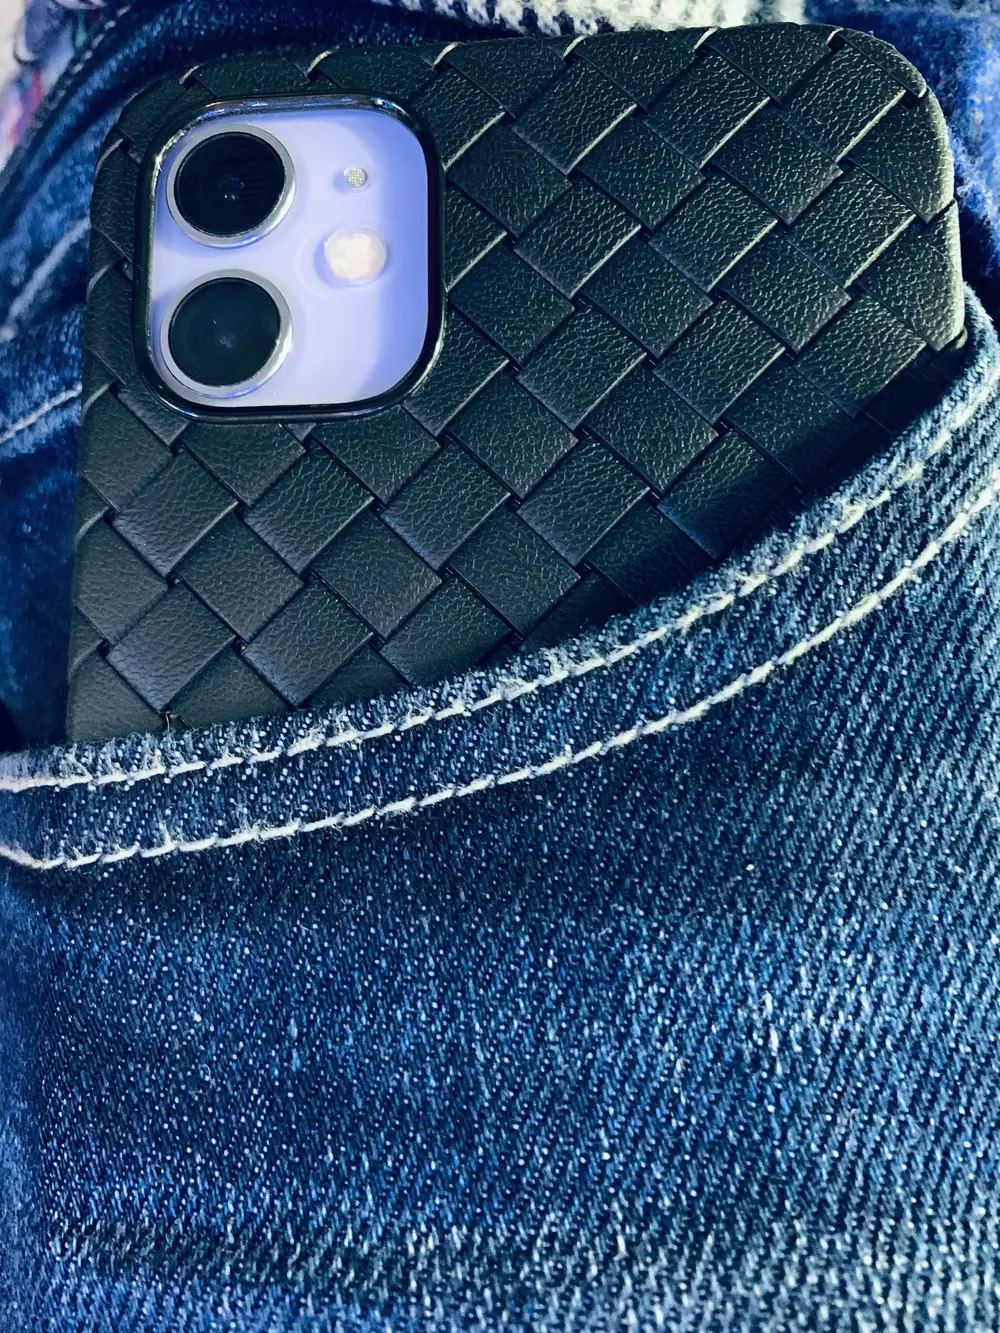 phone in a pocket